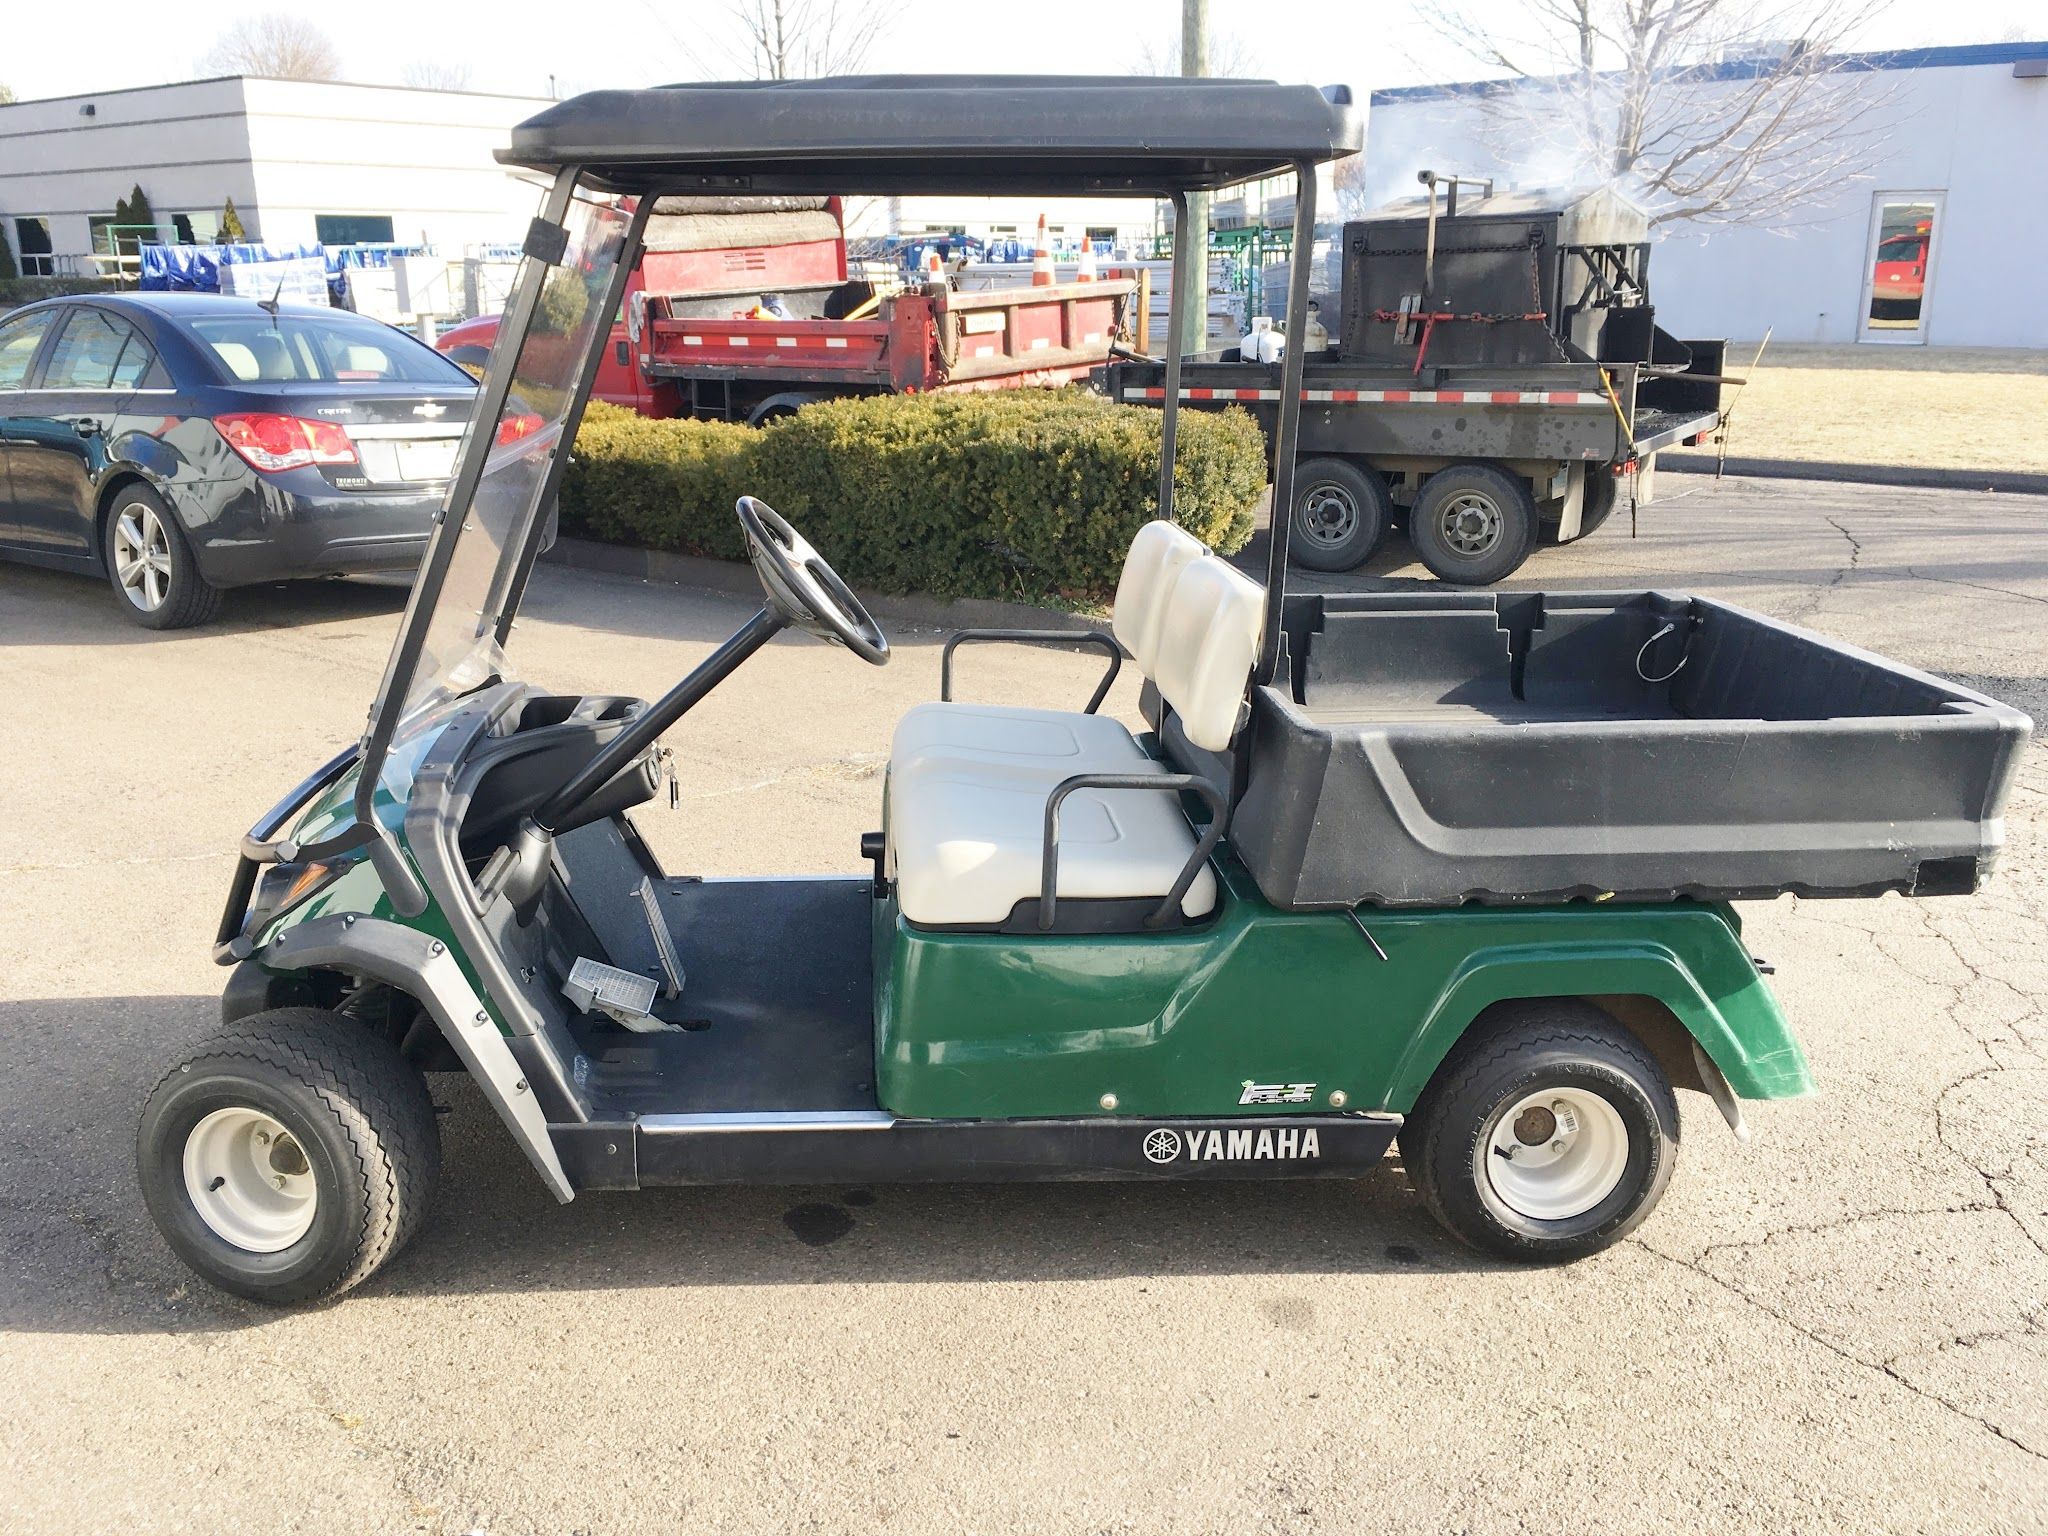 Services & Products Shoreline Golf Cars in Branford CT